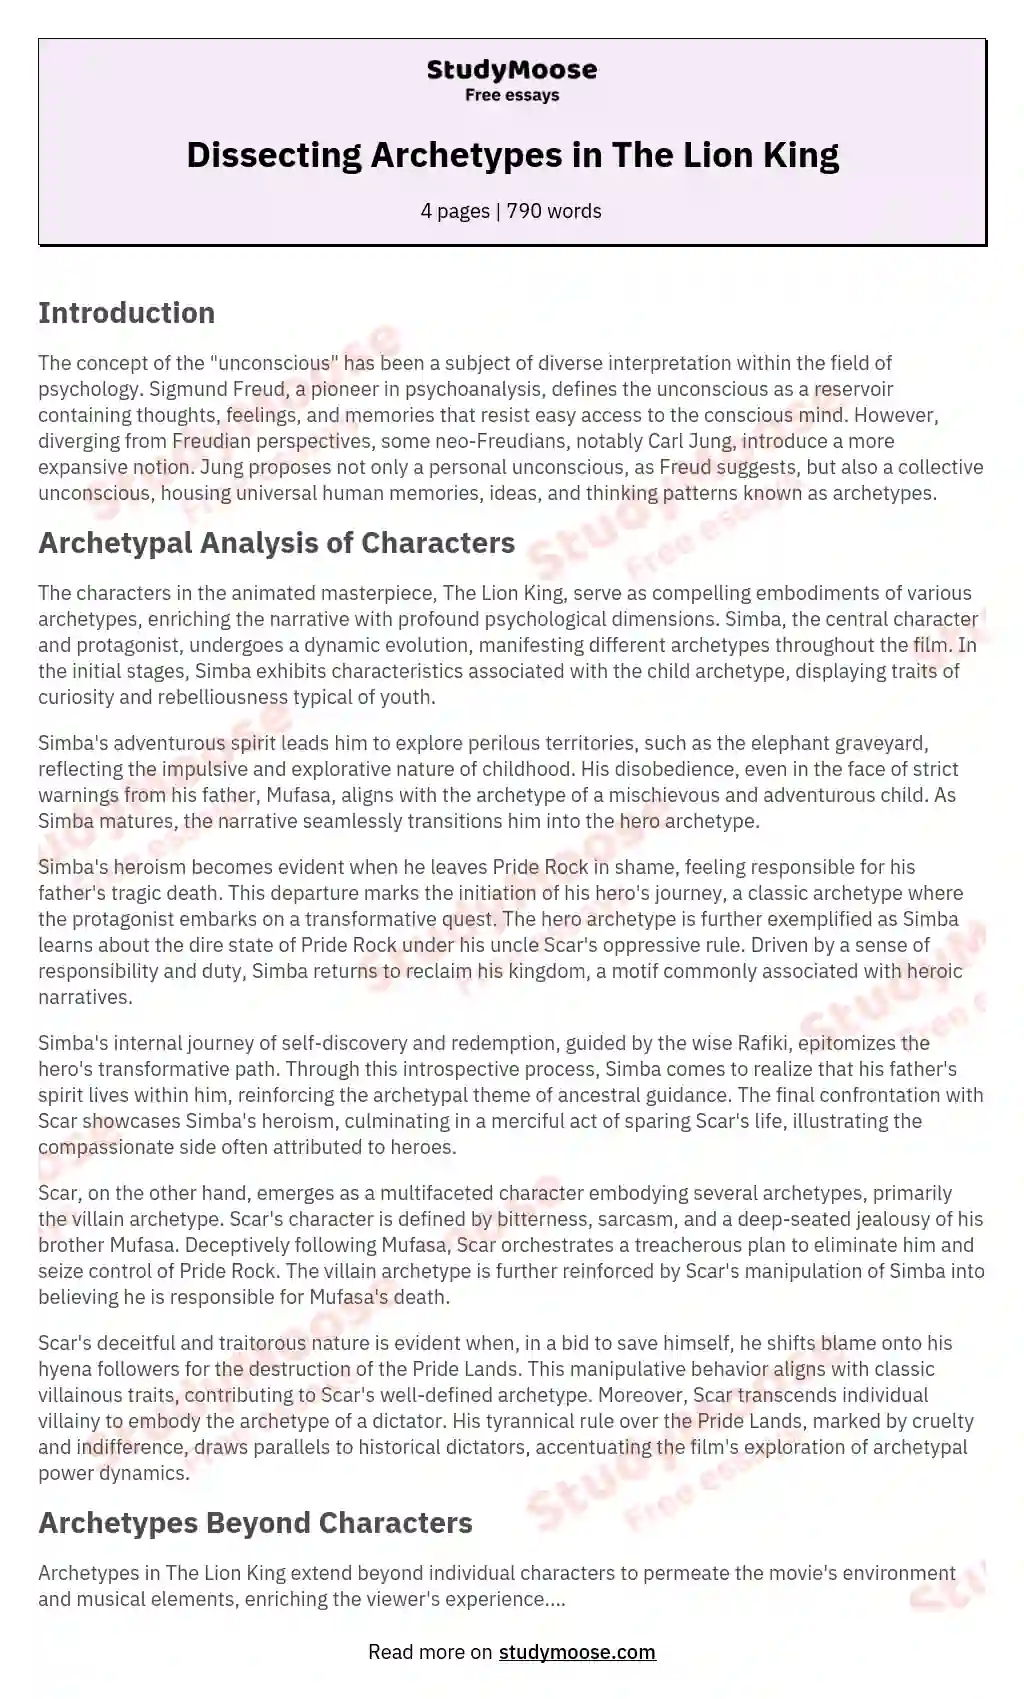 Dissecting Archetypes in The Lion King essay